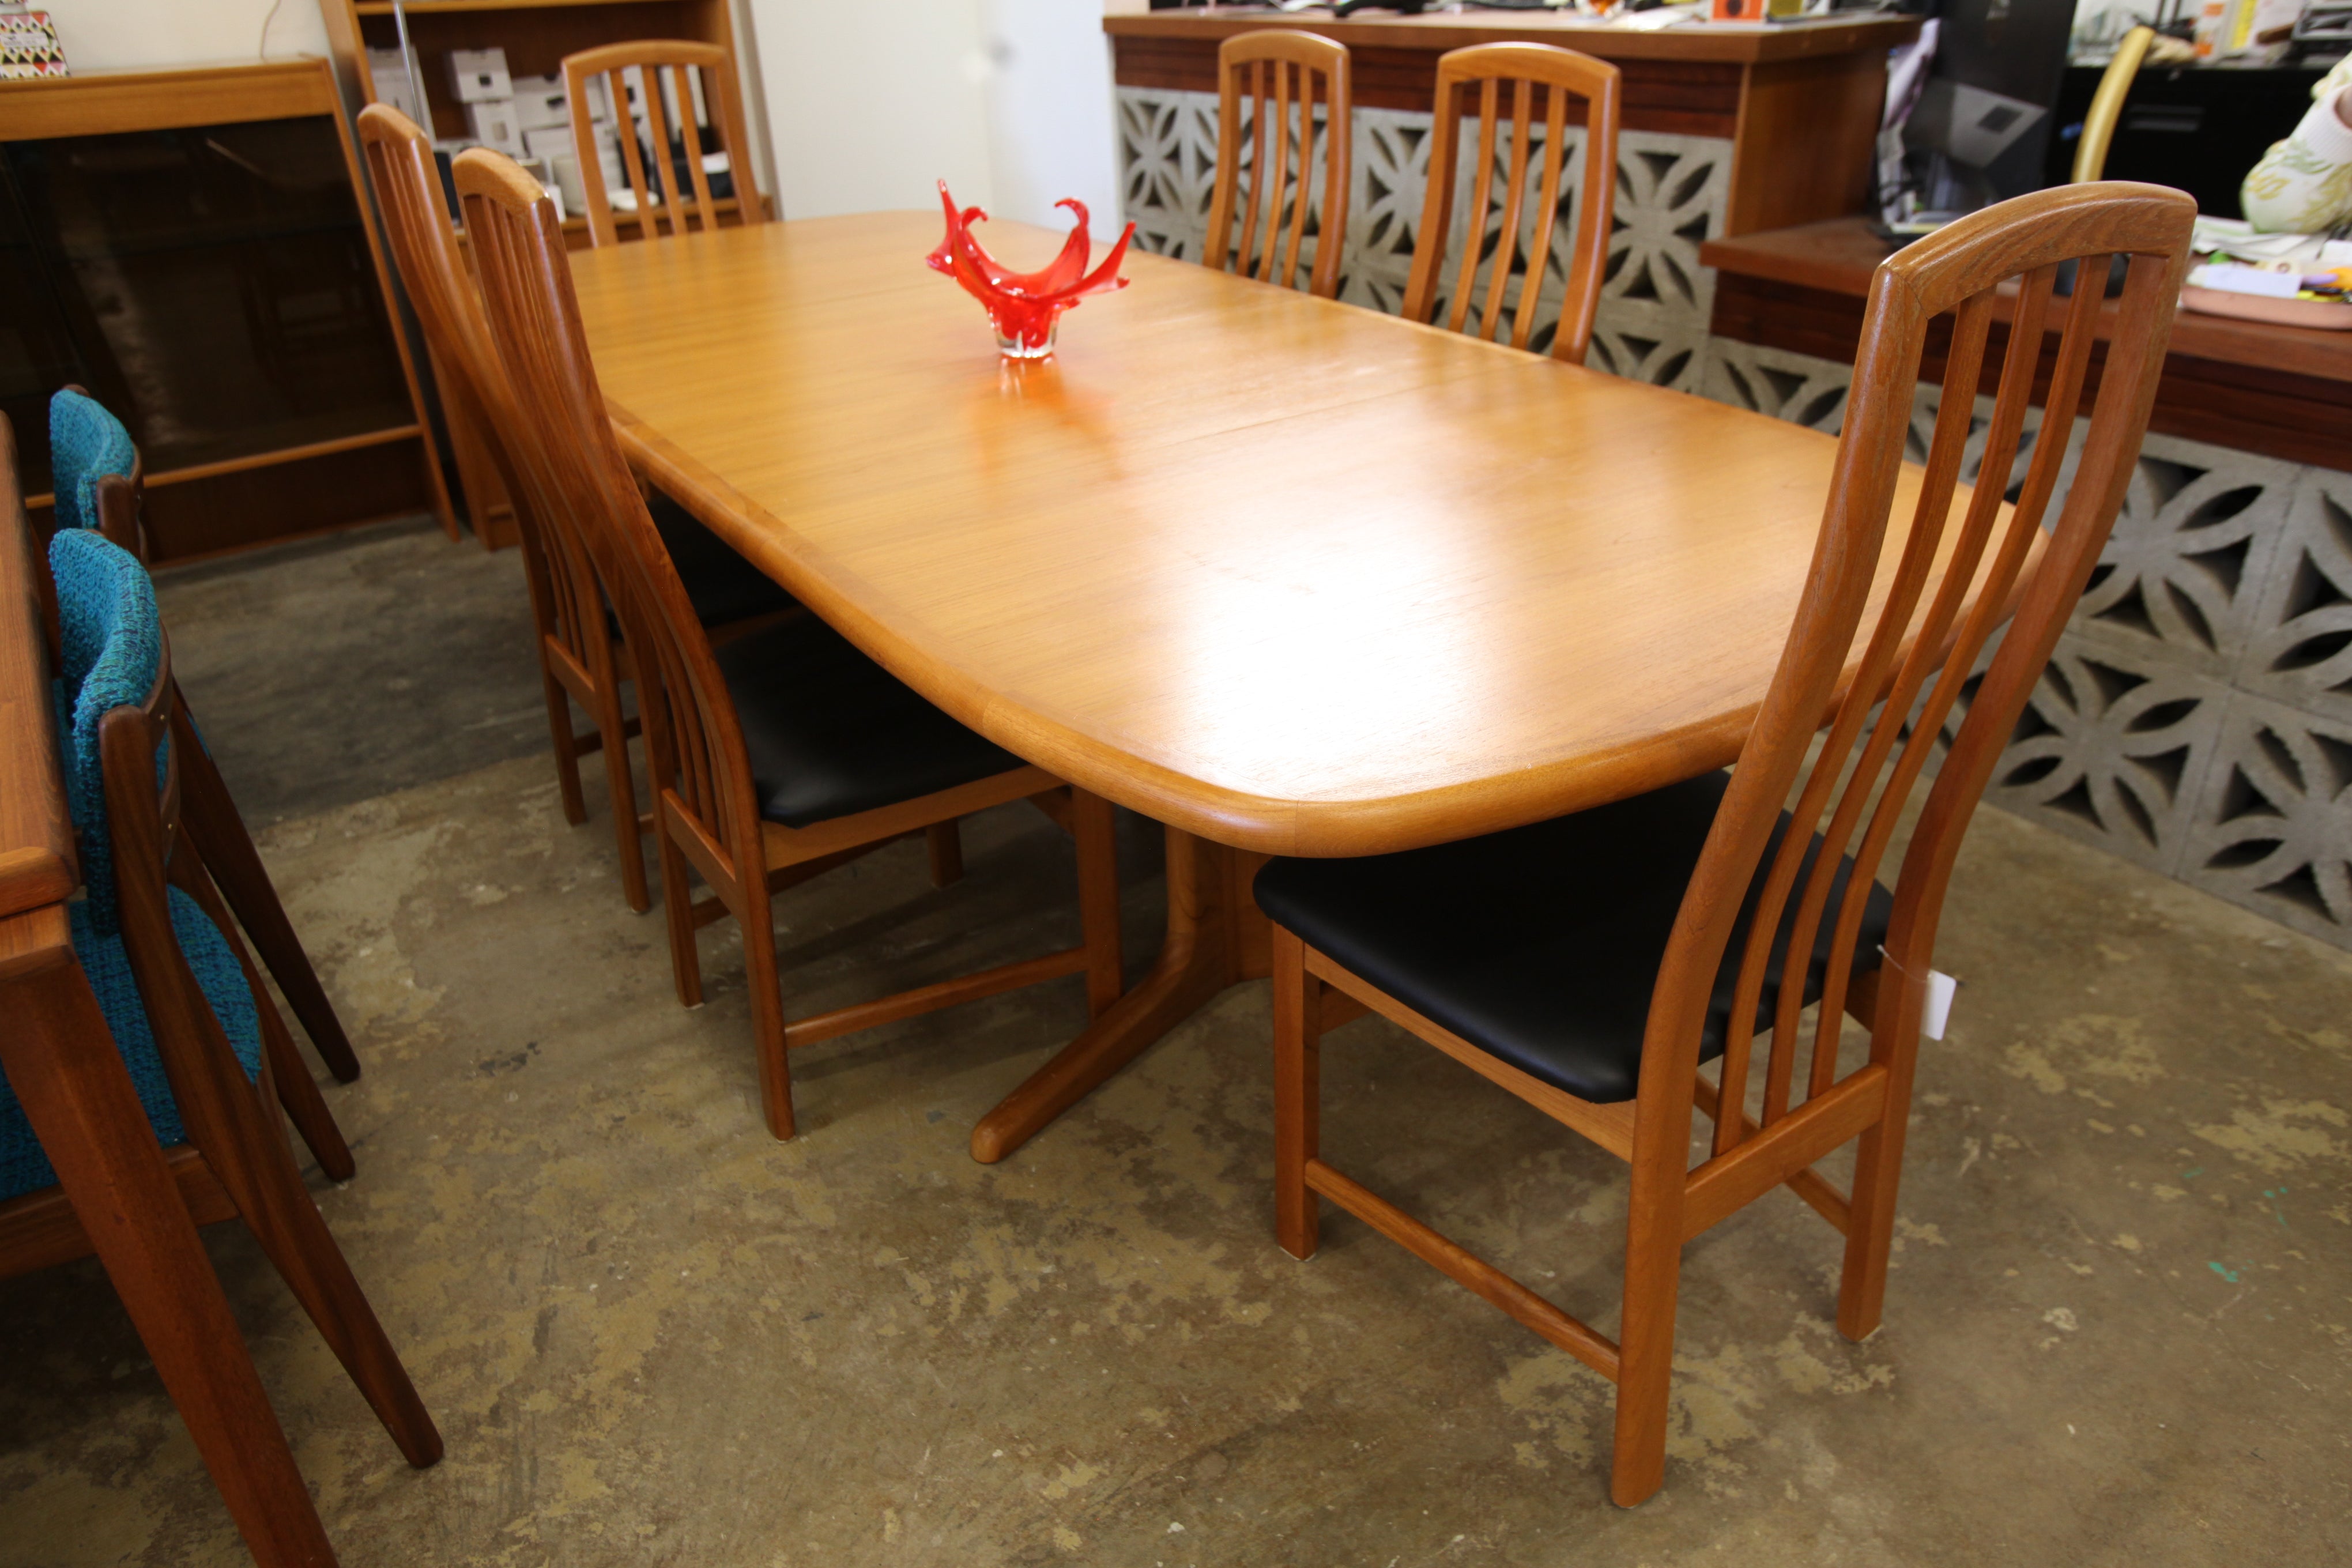 Set of 6 Vintage Teak High Back Dining Chairs w/ New Upholstery